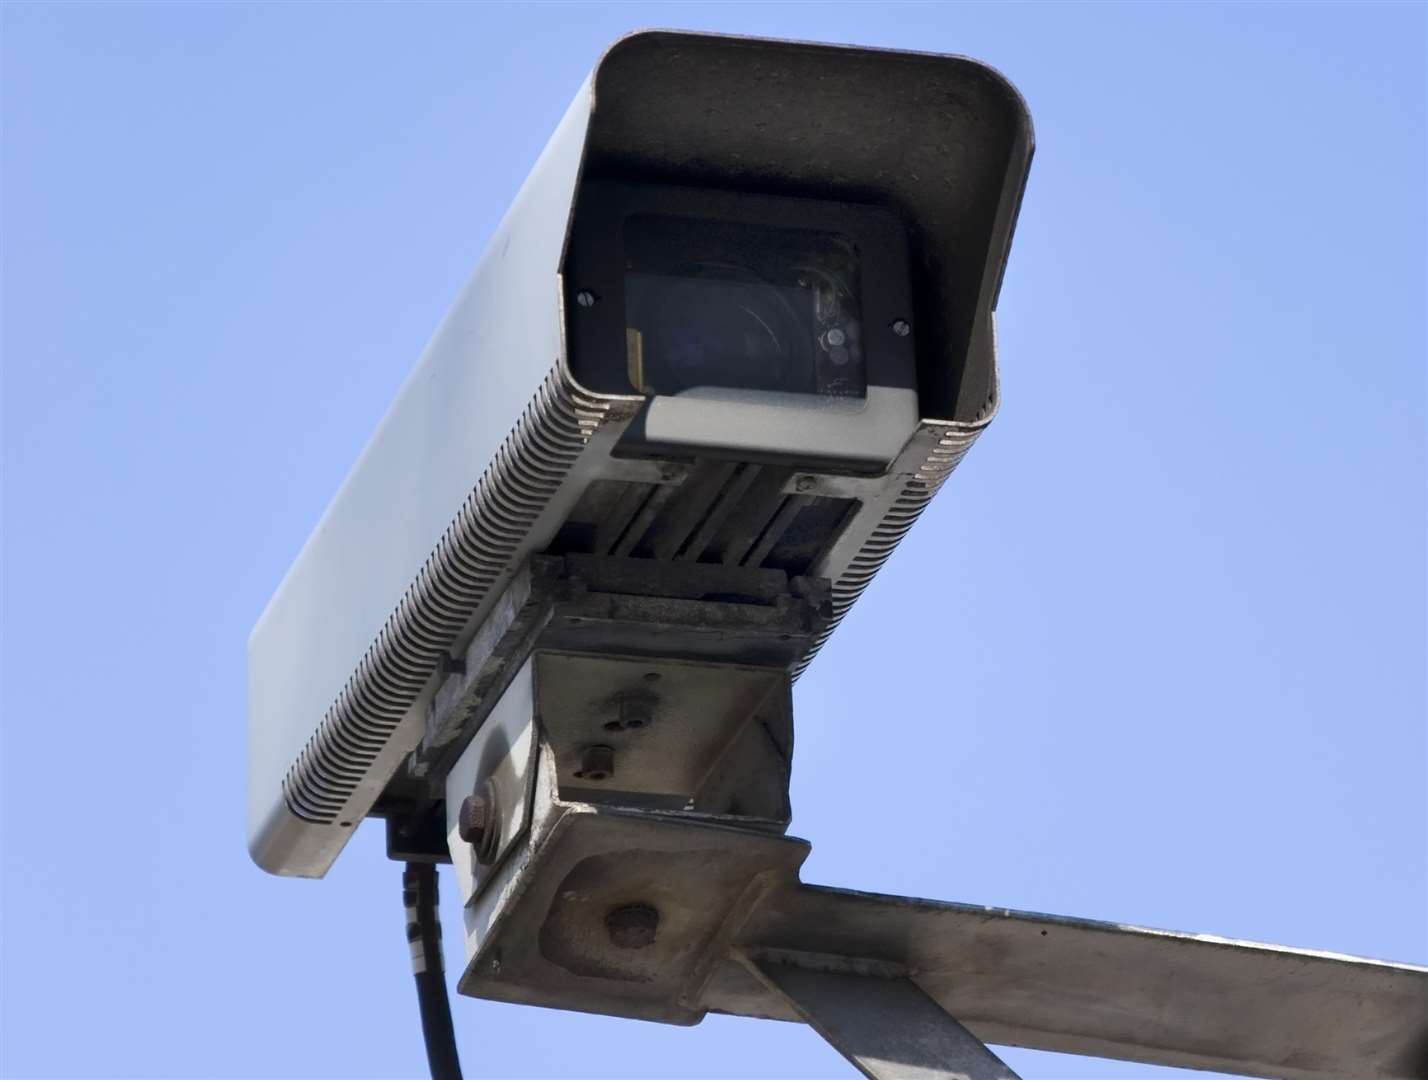 Stock picture of a CCTV camera